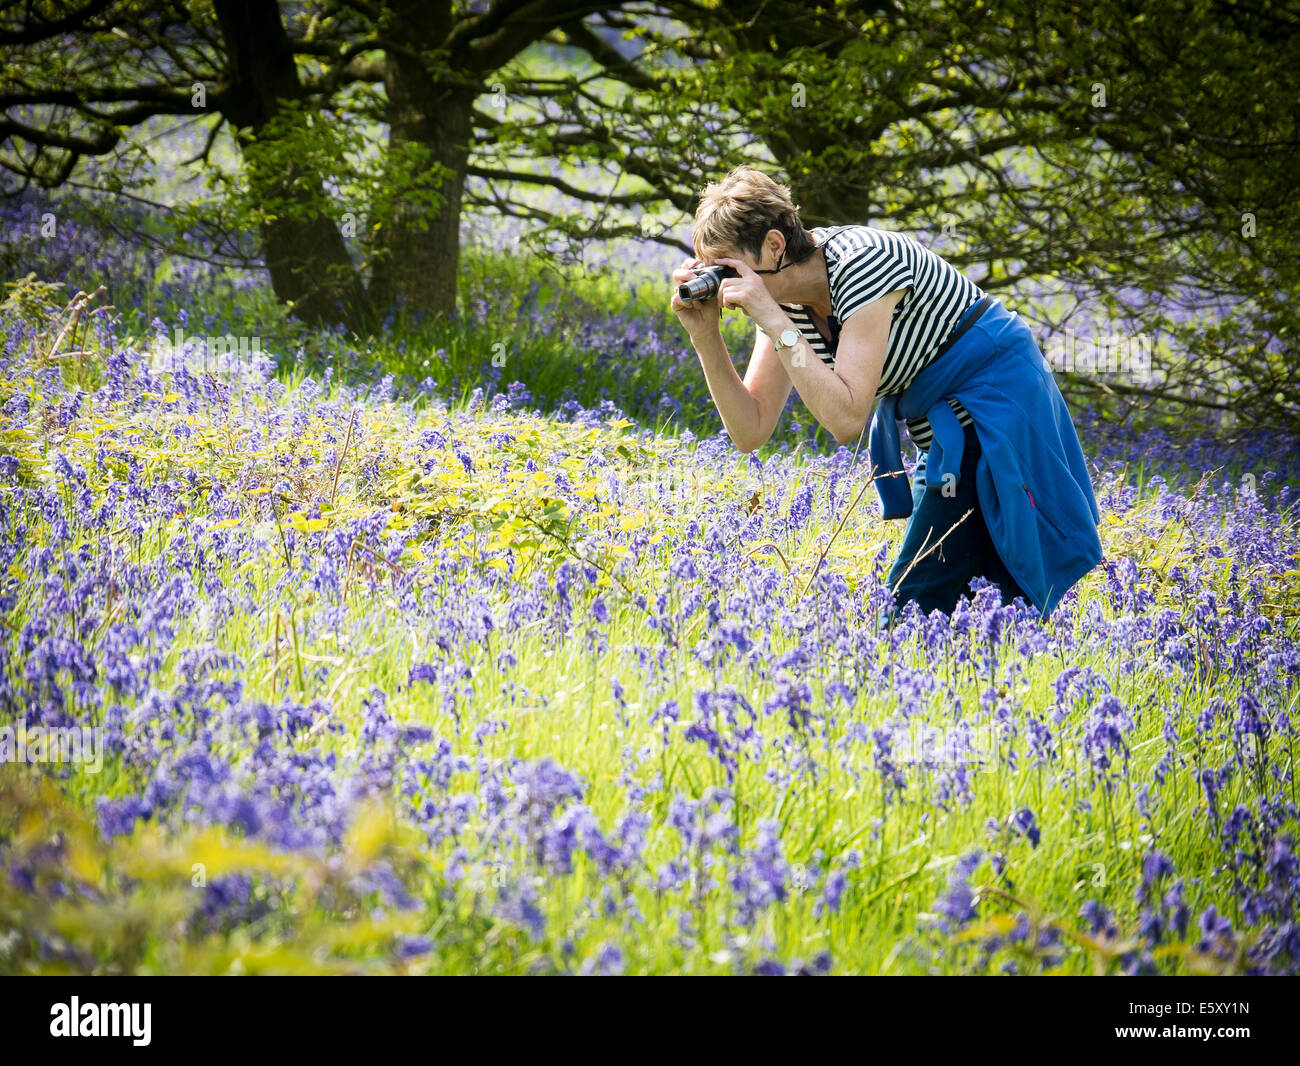 Woman photographing bluebells Stock Photo